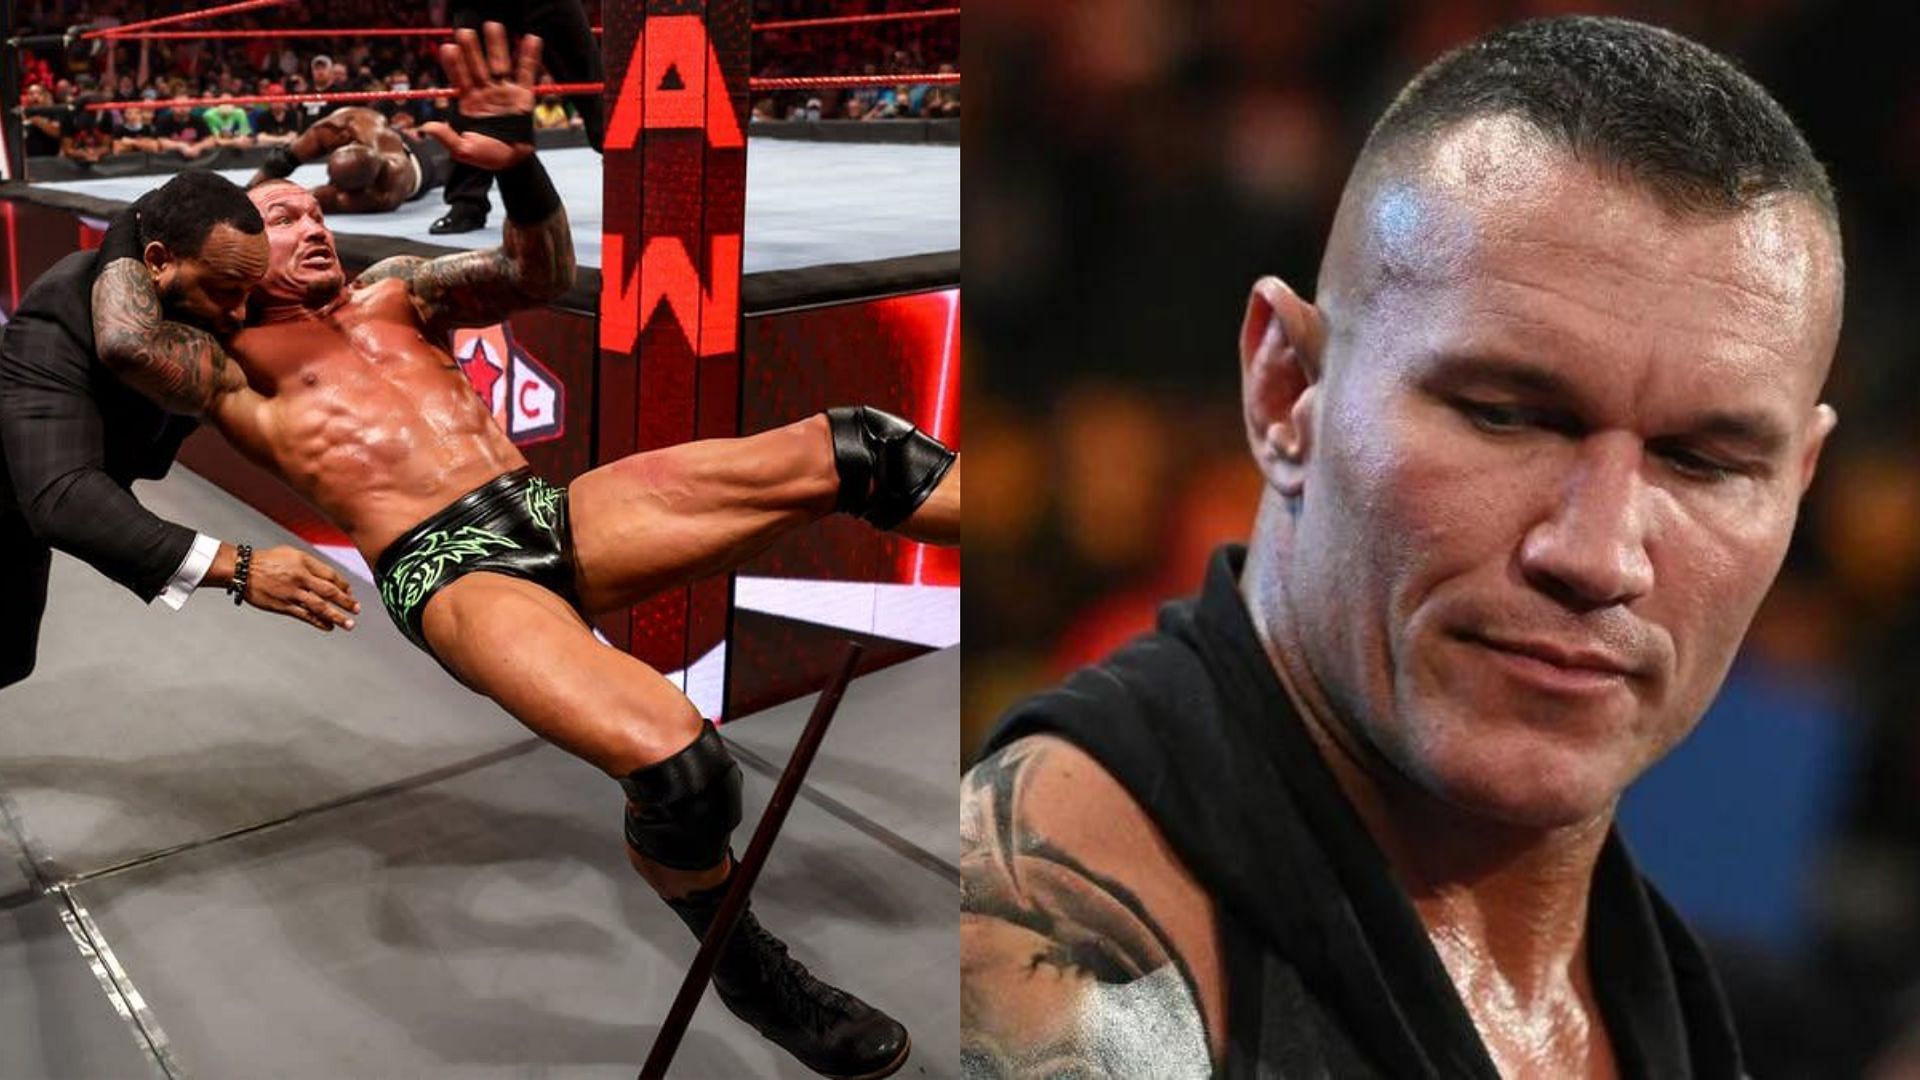 Randy Orton will face LA Knight and AJ Styles in a Triple Threat Match